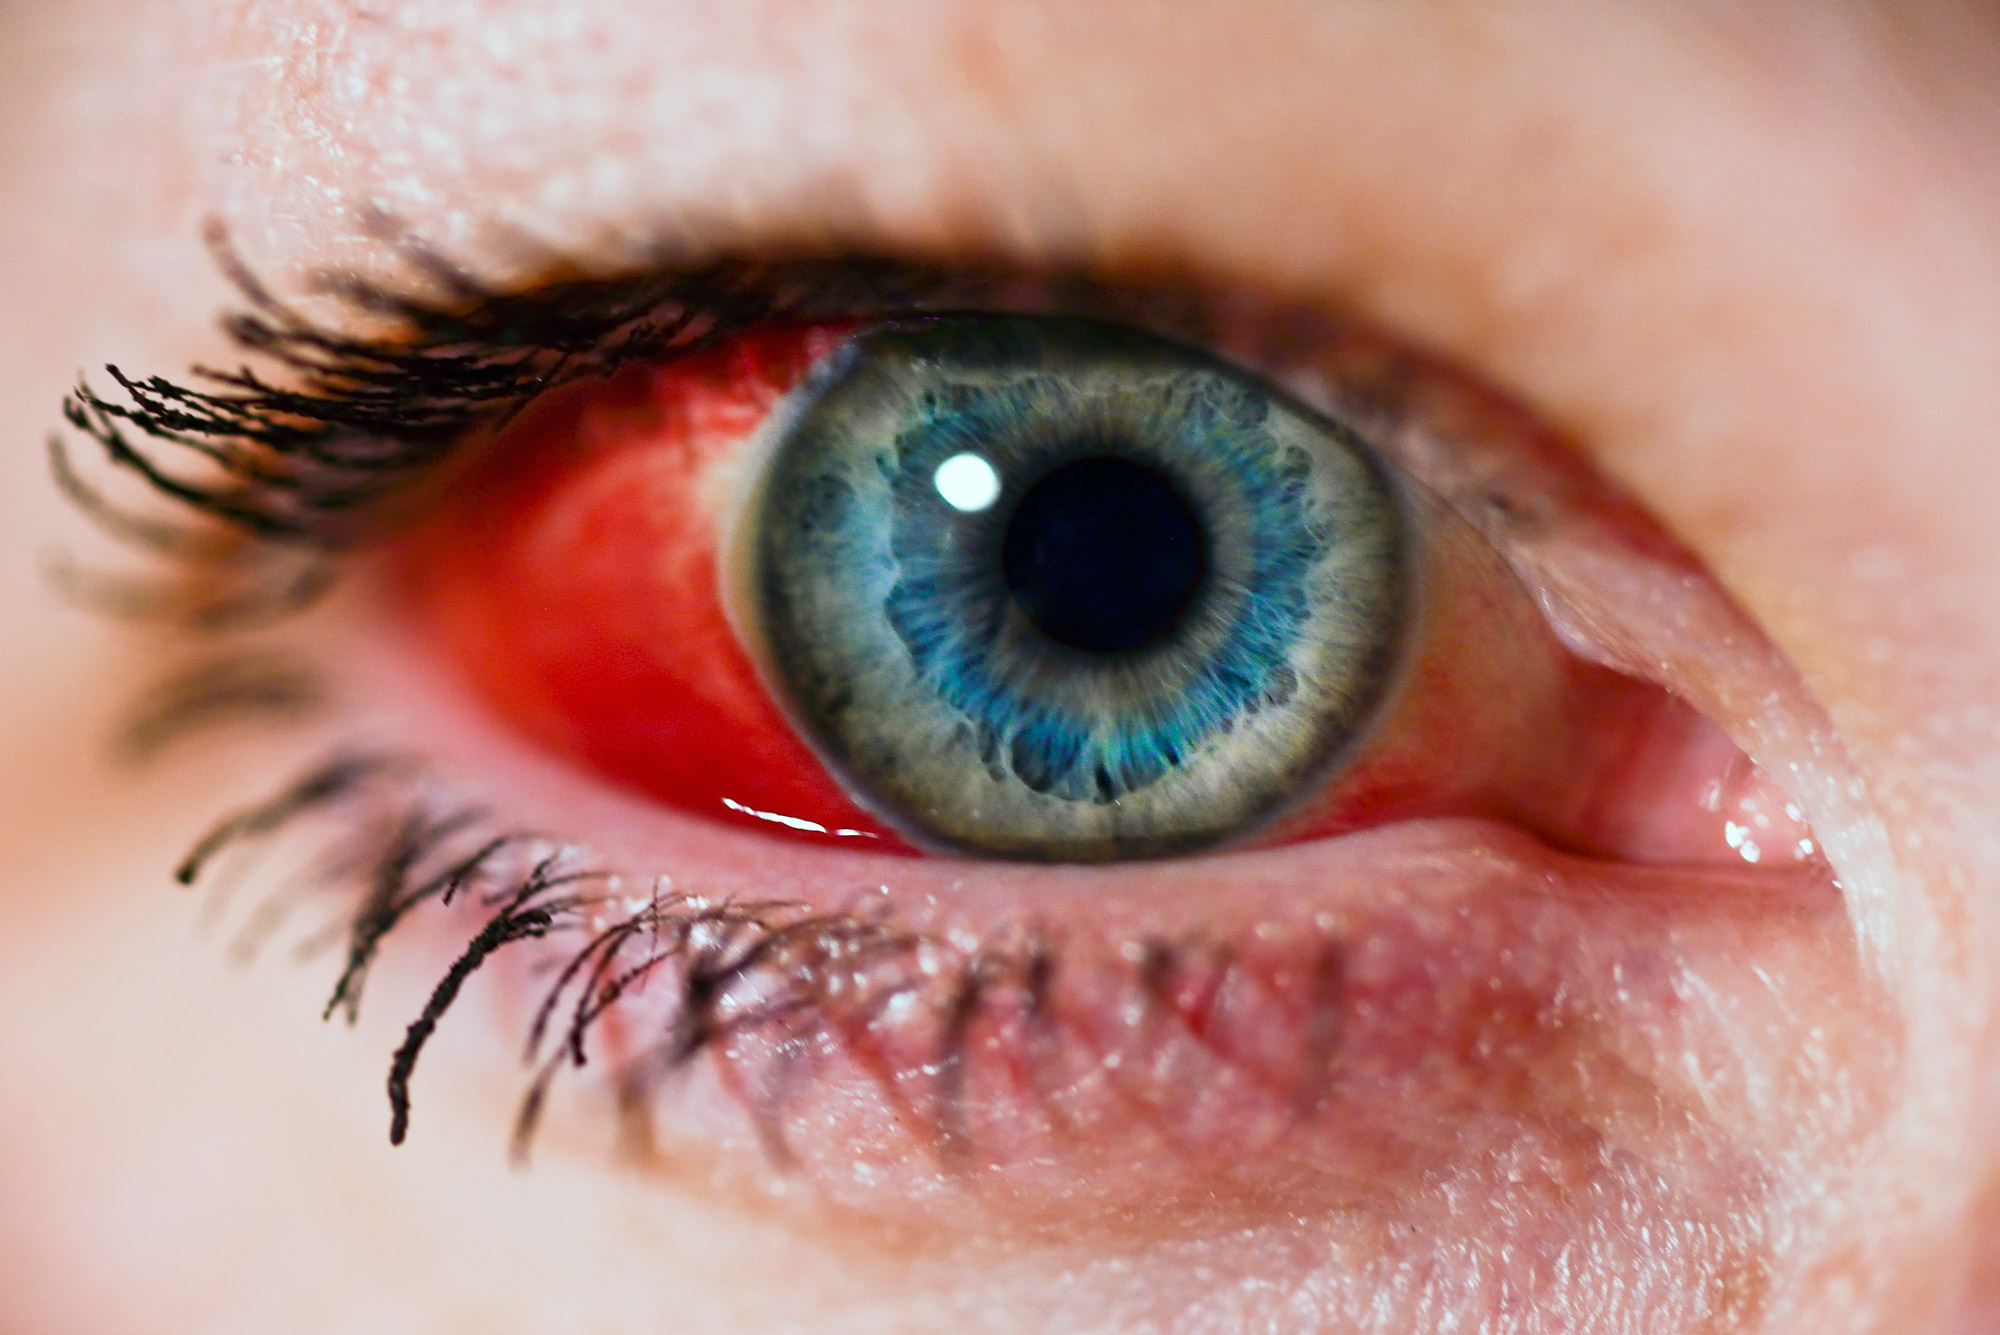 A subconjunctival hemorrhage on the surface of a person’s eye.